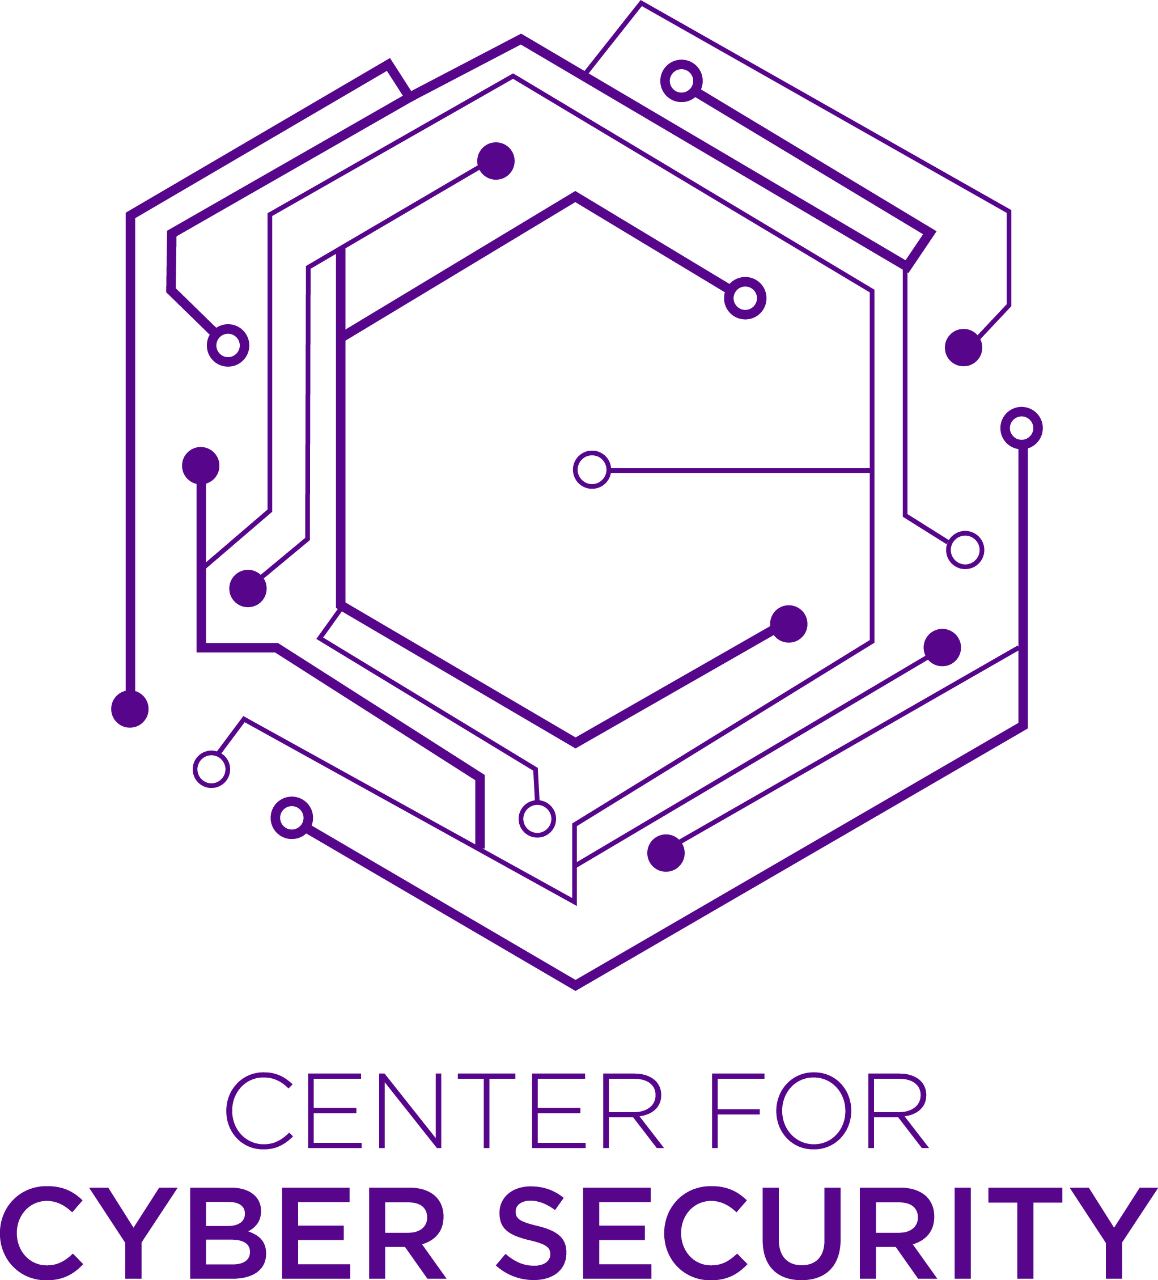 To establish a world class cyber security center by partnering with key local universities, industry and government agencies in order to facilitate cyber security research, education and practice in the UAE and more generally in the GCC region. The center will act as a catalyst to improve cyber security in the UAE and enhance its regional and global competitiveness in this field. CCS is affiliated with CCS New York.